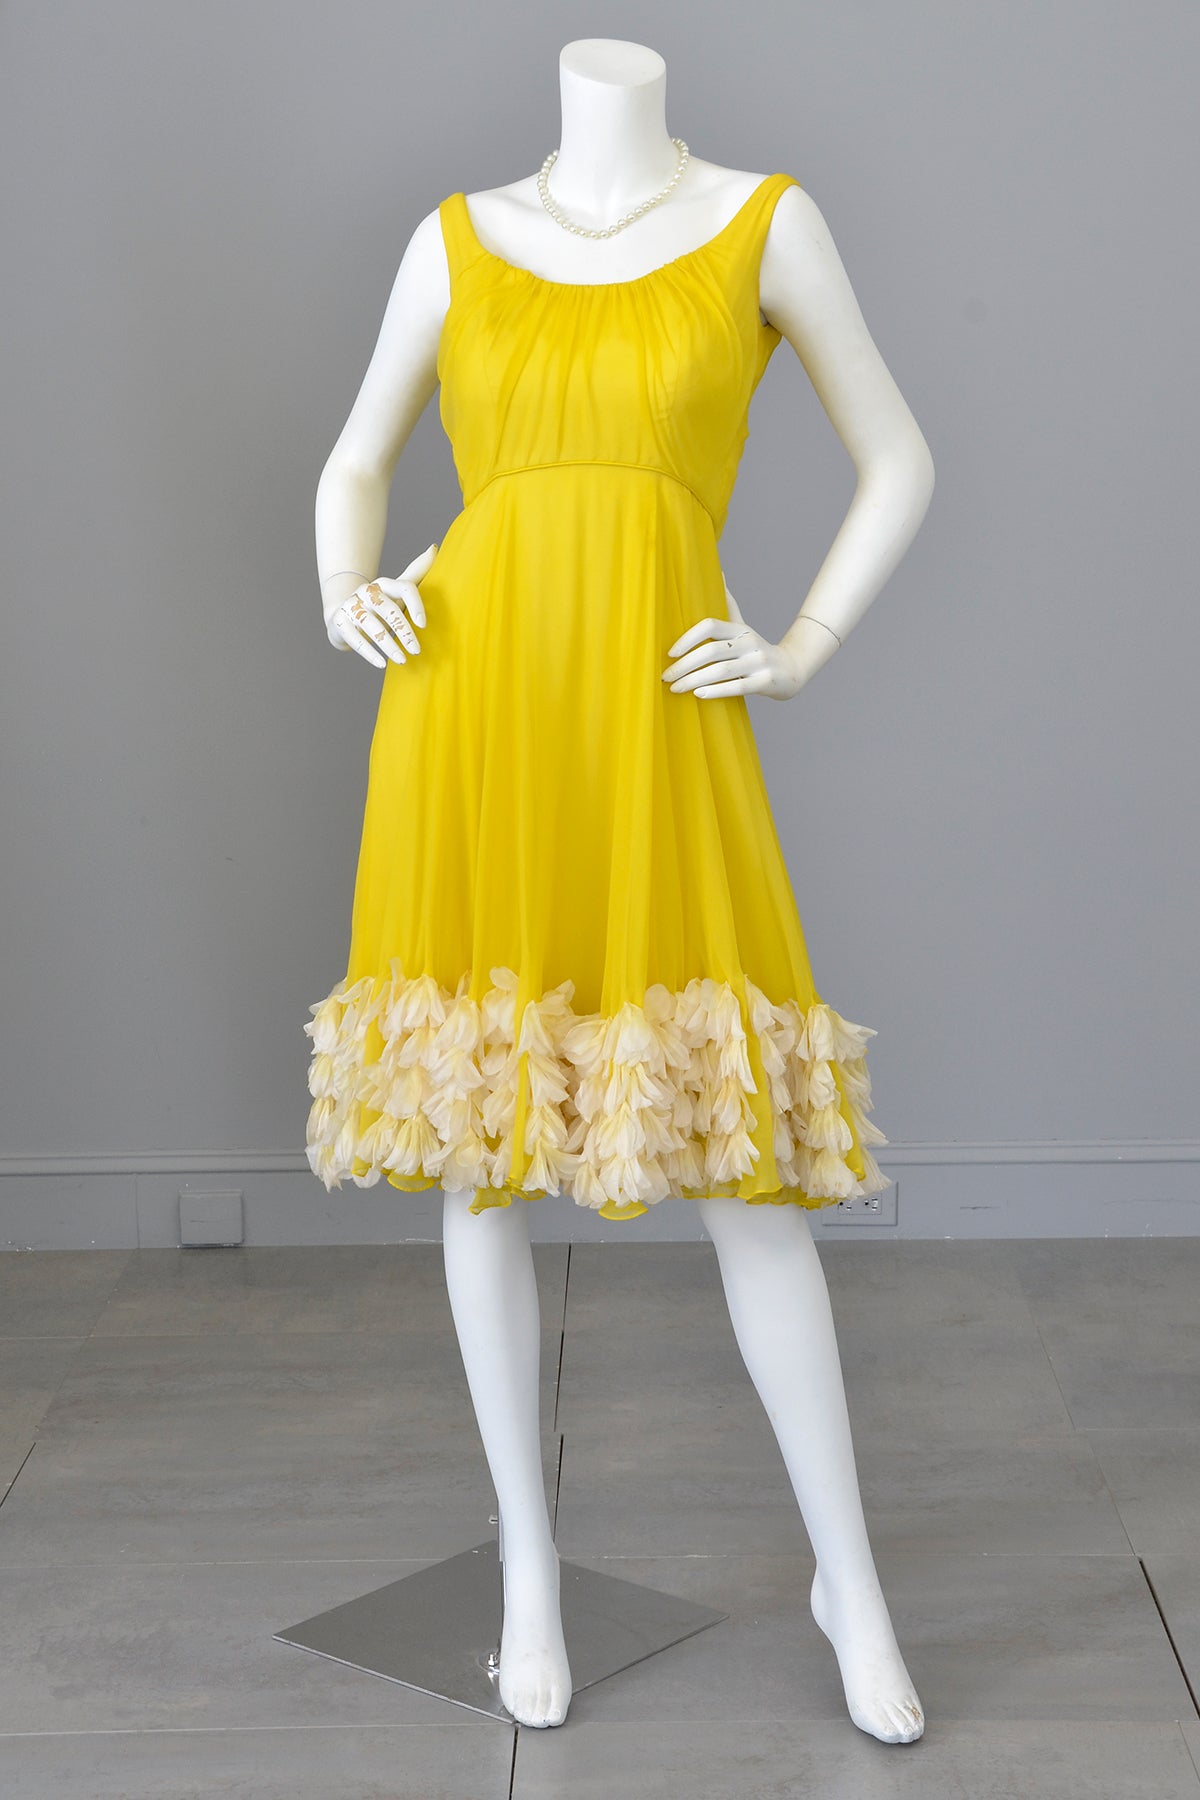 1960s Frothy and Sunny Chiffon Party Dress w amazing Petals at the hem